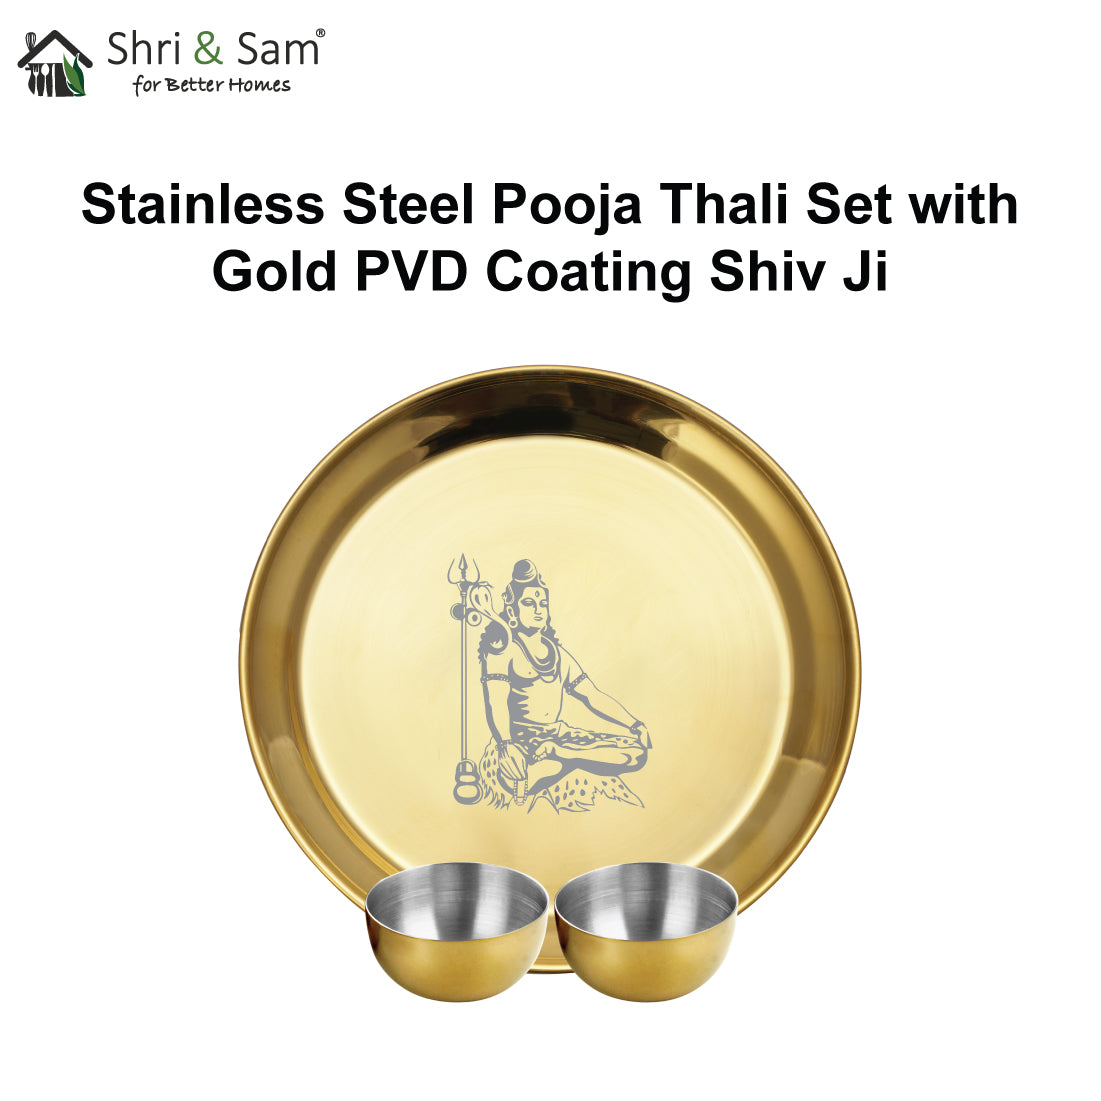 Stainless Steel Pooja Thali Set with Gold PVD Coating Shiv